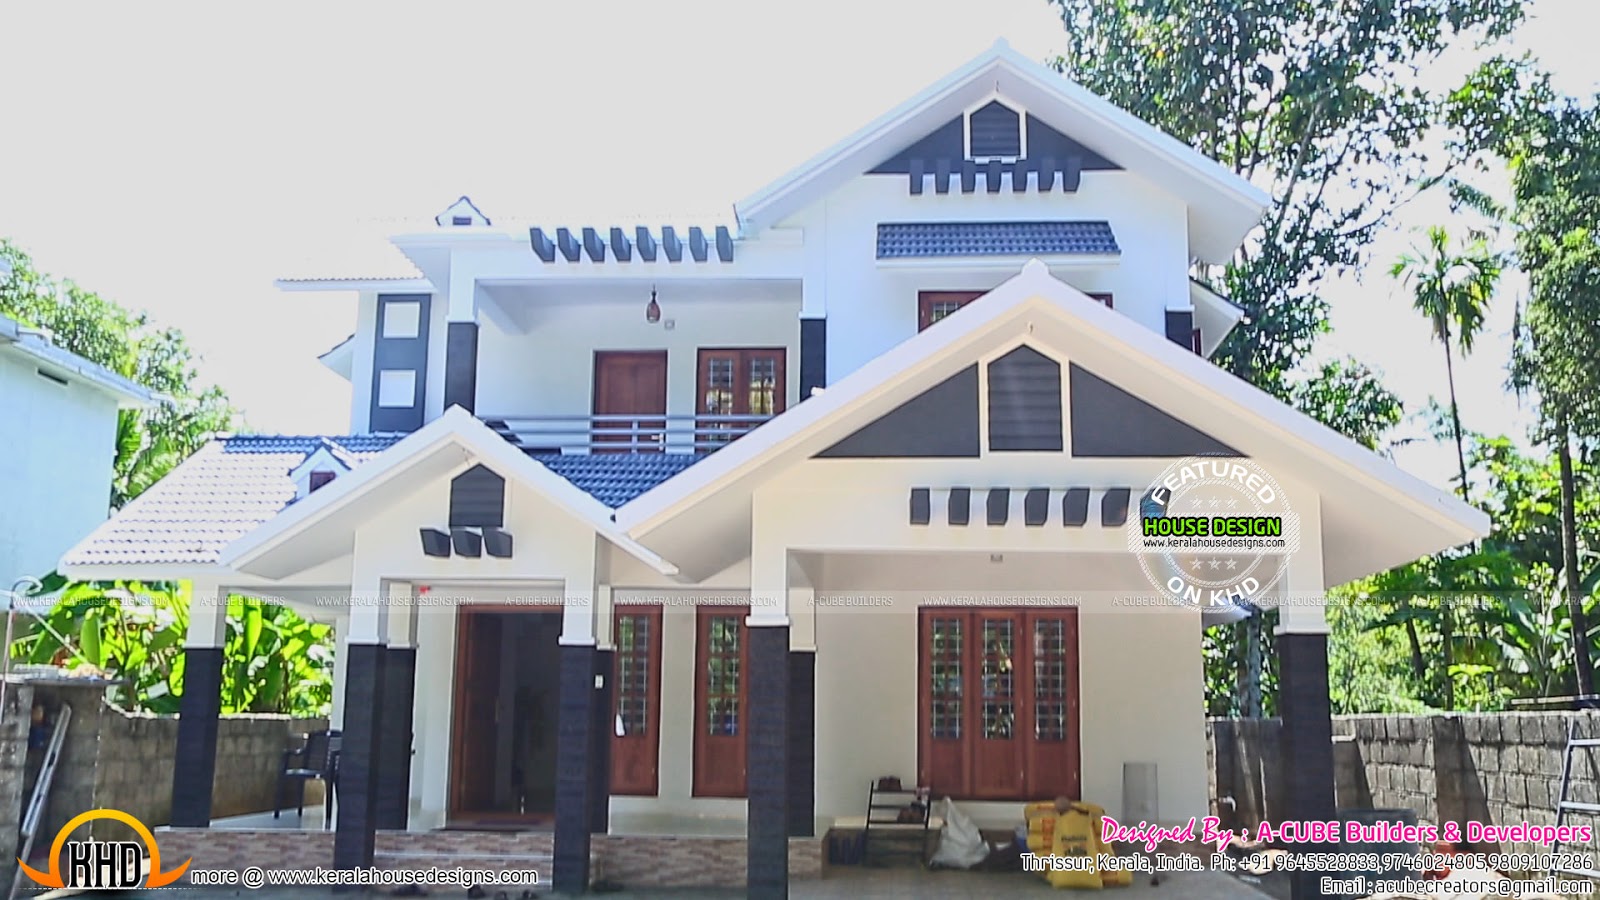  New  House  Plans  for 2019 starts here Kerala home  design  